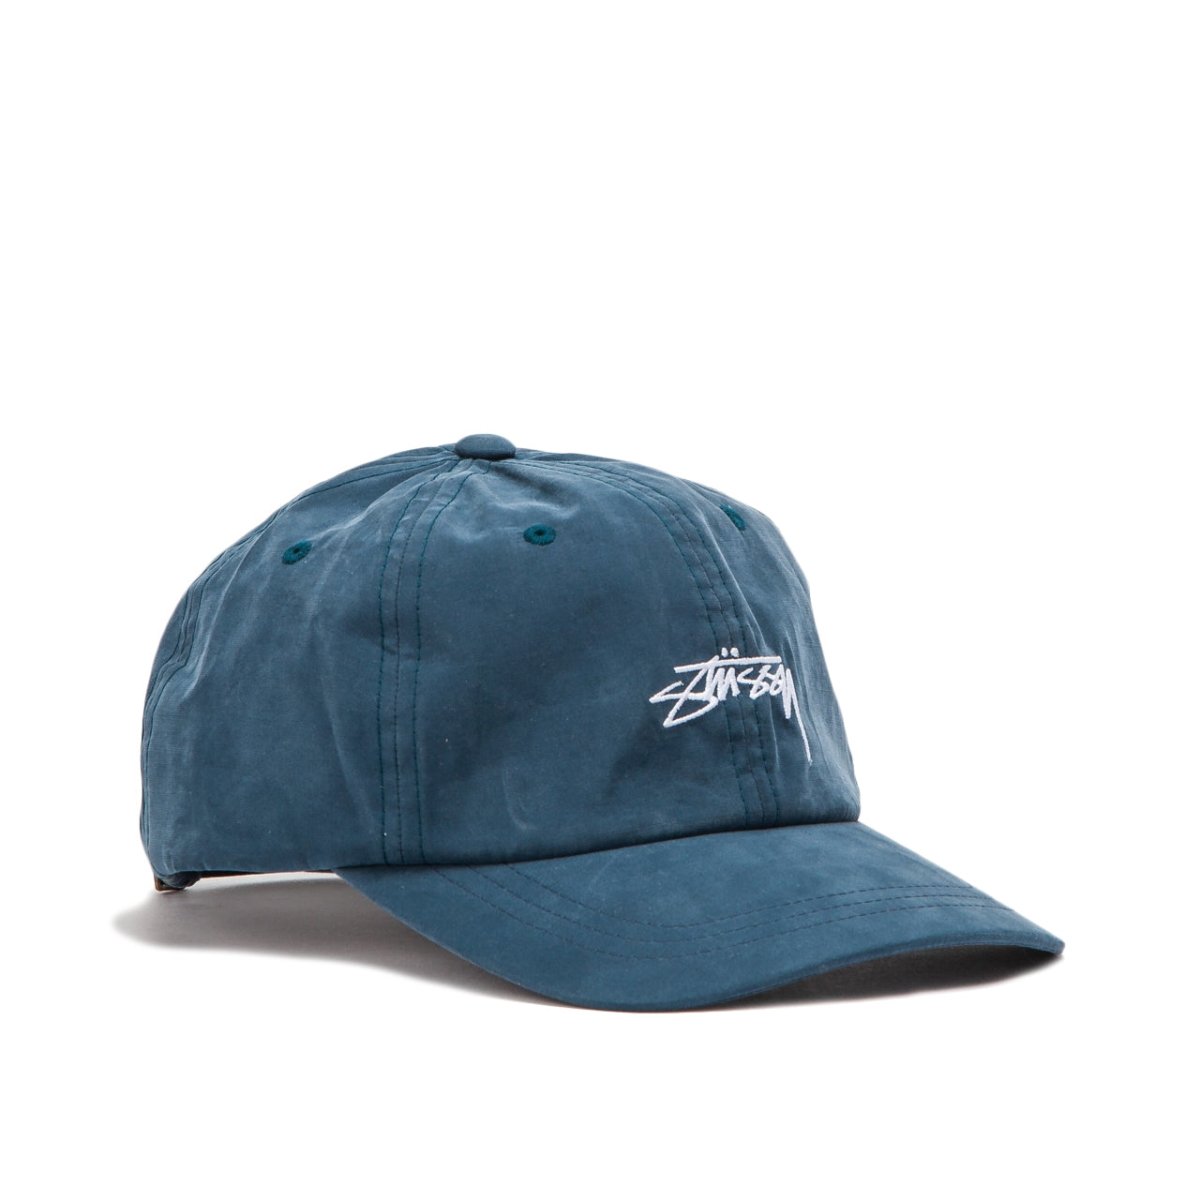 Stüssy Peached Smooth Stock Low Pro Cap (Blau)  - Allike Store